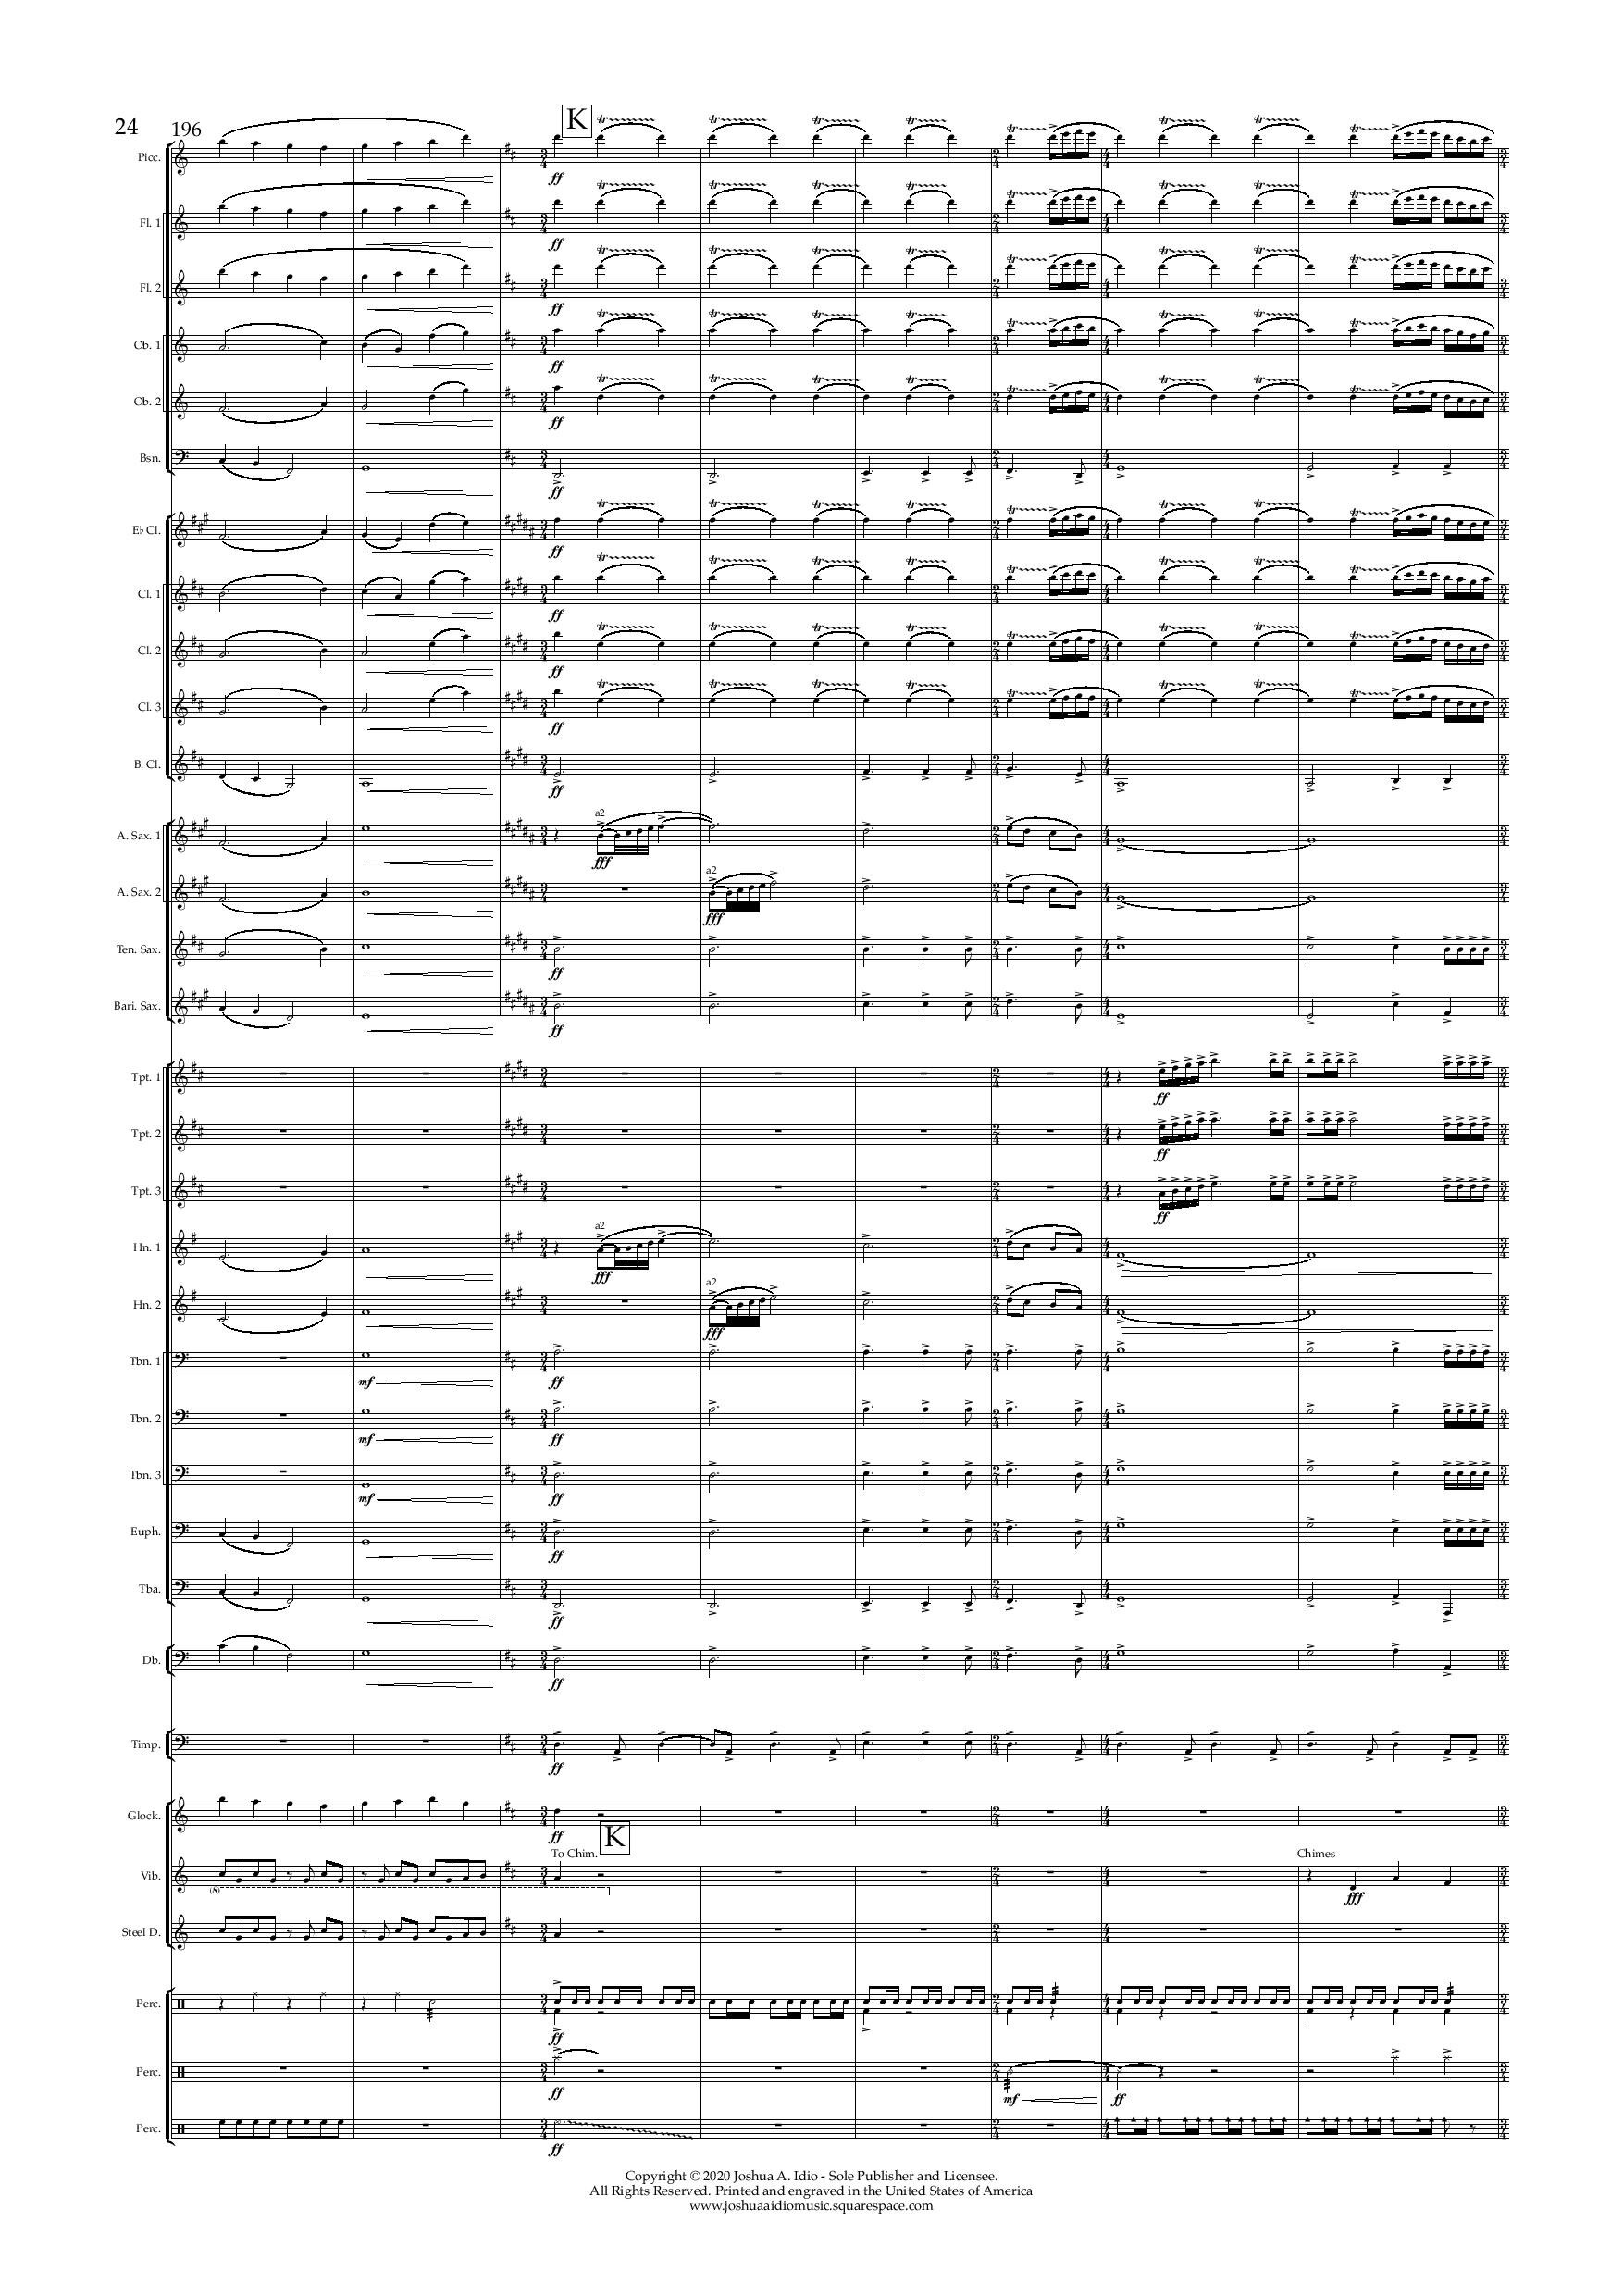 The Cruise Line Dream - Conductor s Score-page-024.jpg